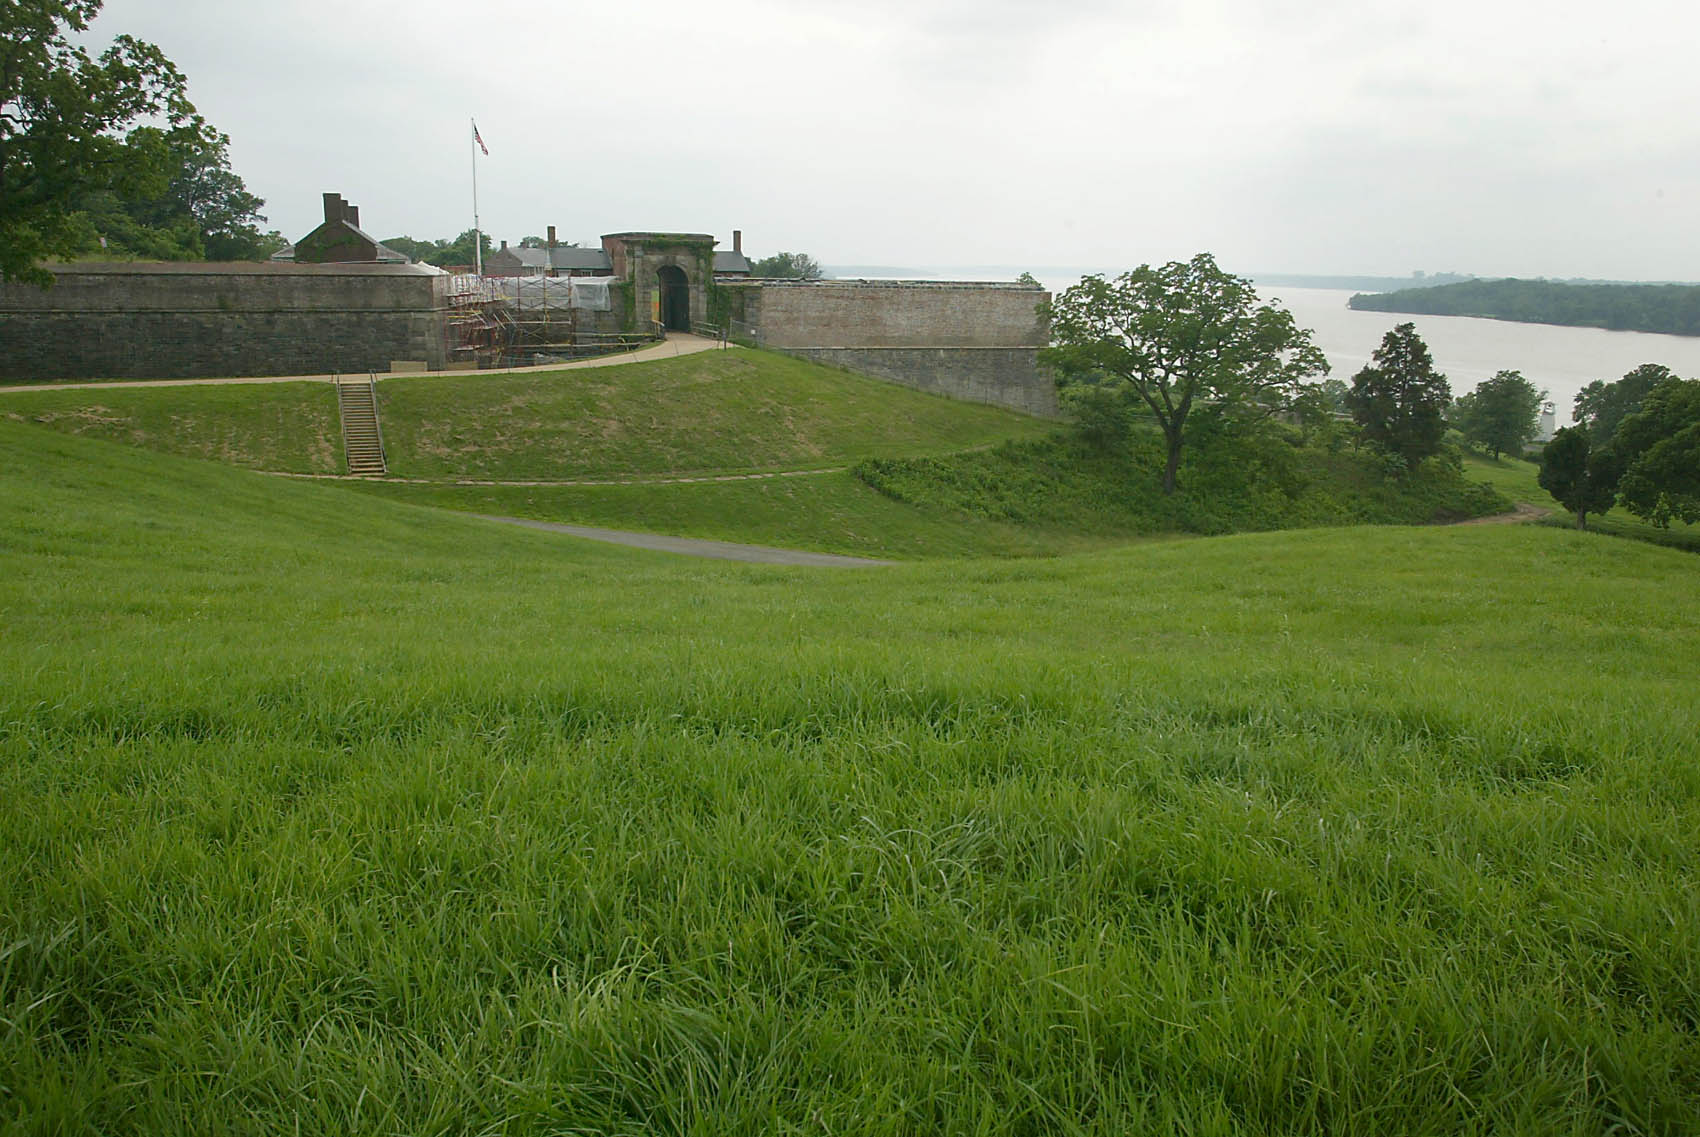 Fort Washington is shown along the Potomac River Monday, June 16, 2003, in Fort Washington, Md. Built in 1824, Fort Washington guarded the capital through the Civil War and World War I before being decommissioned in the 1940s. Now a national park, the aging fort fights a new enemy that poses threat much graver than enemy guns. (AP Photo/Matt Houston)